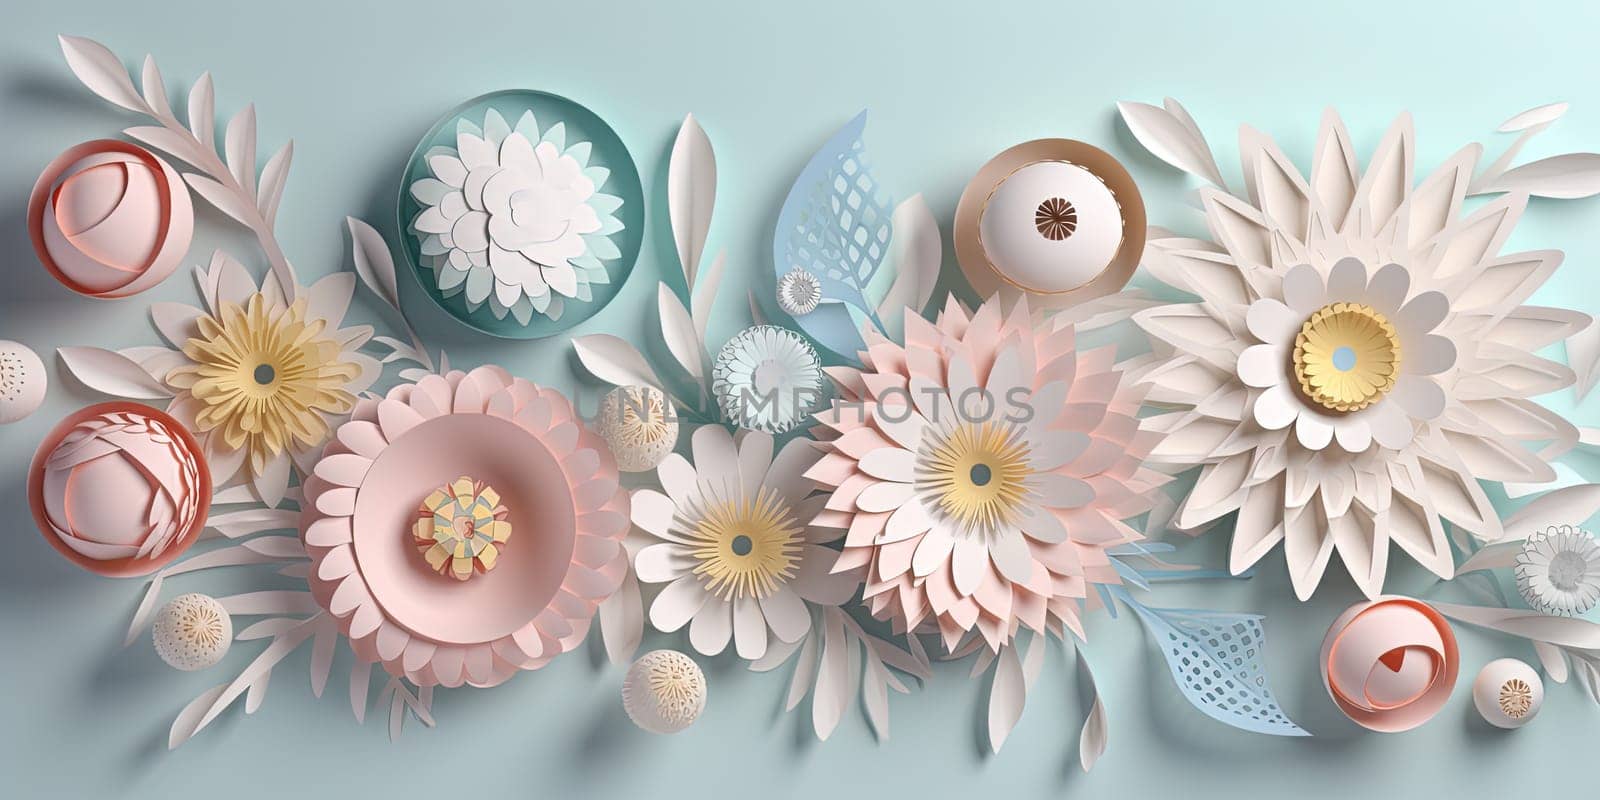 Pastel Colors Brighten Quilling Illustration On Paper, Filled With Flowers